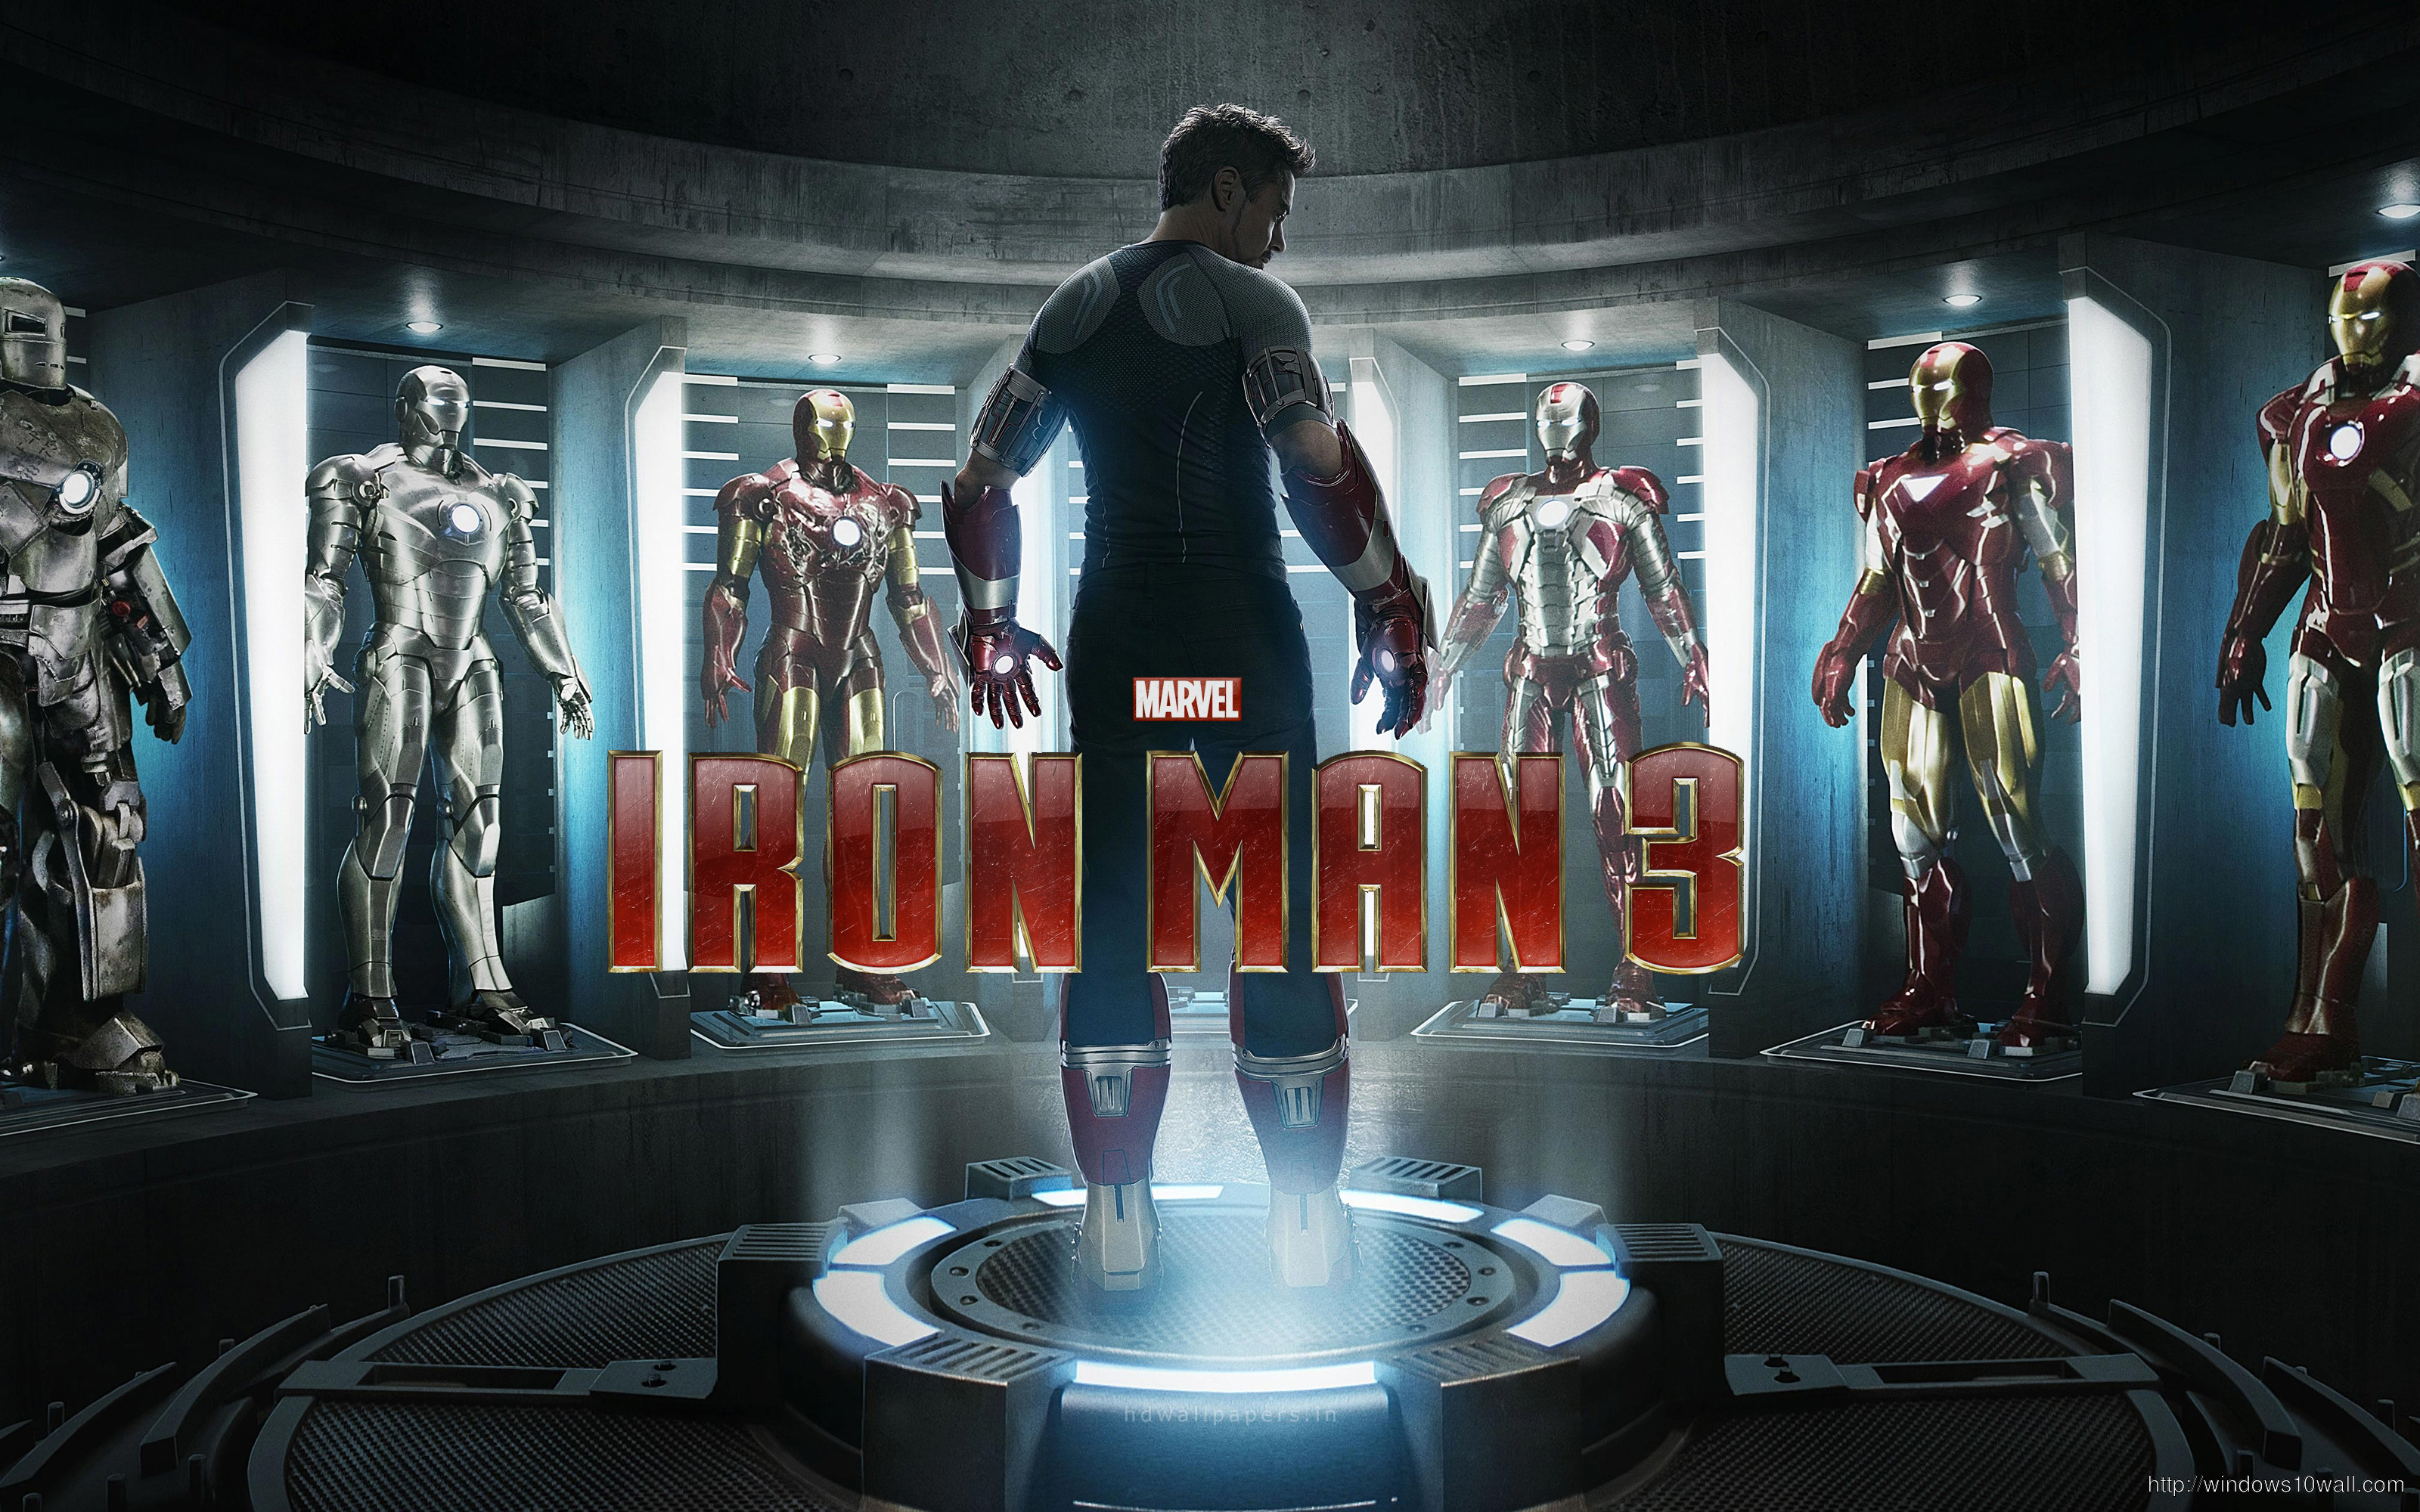 Iron Man 3 is as Big as The Avengers wallpaper free